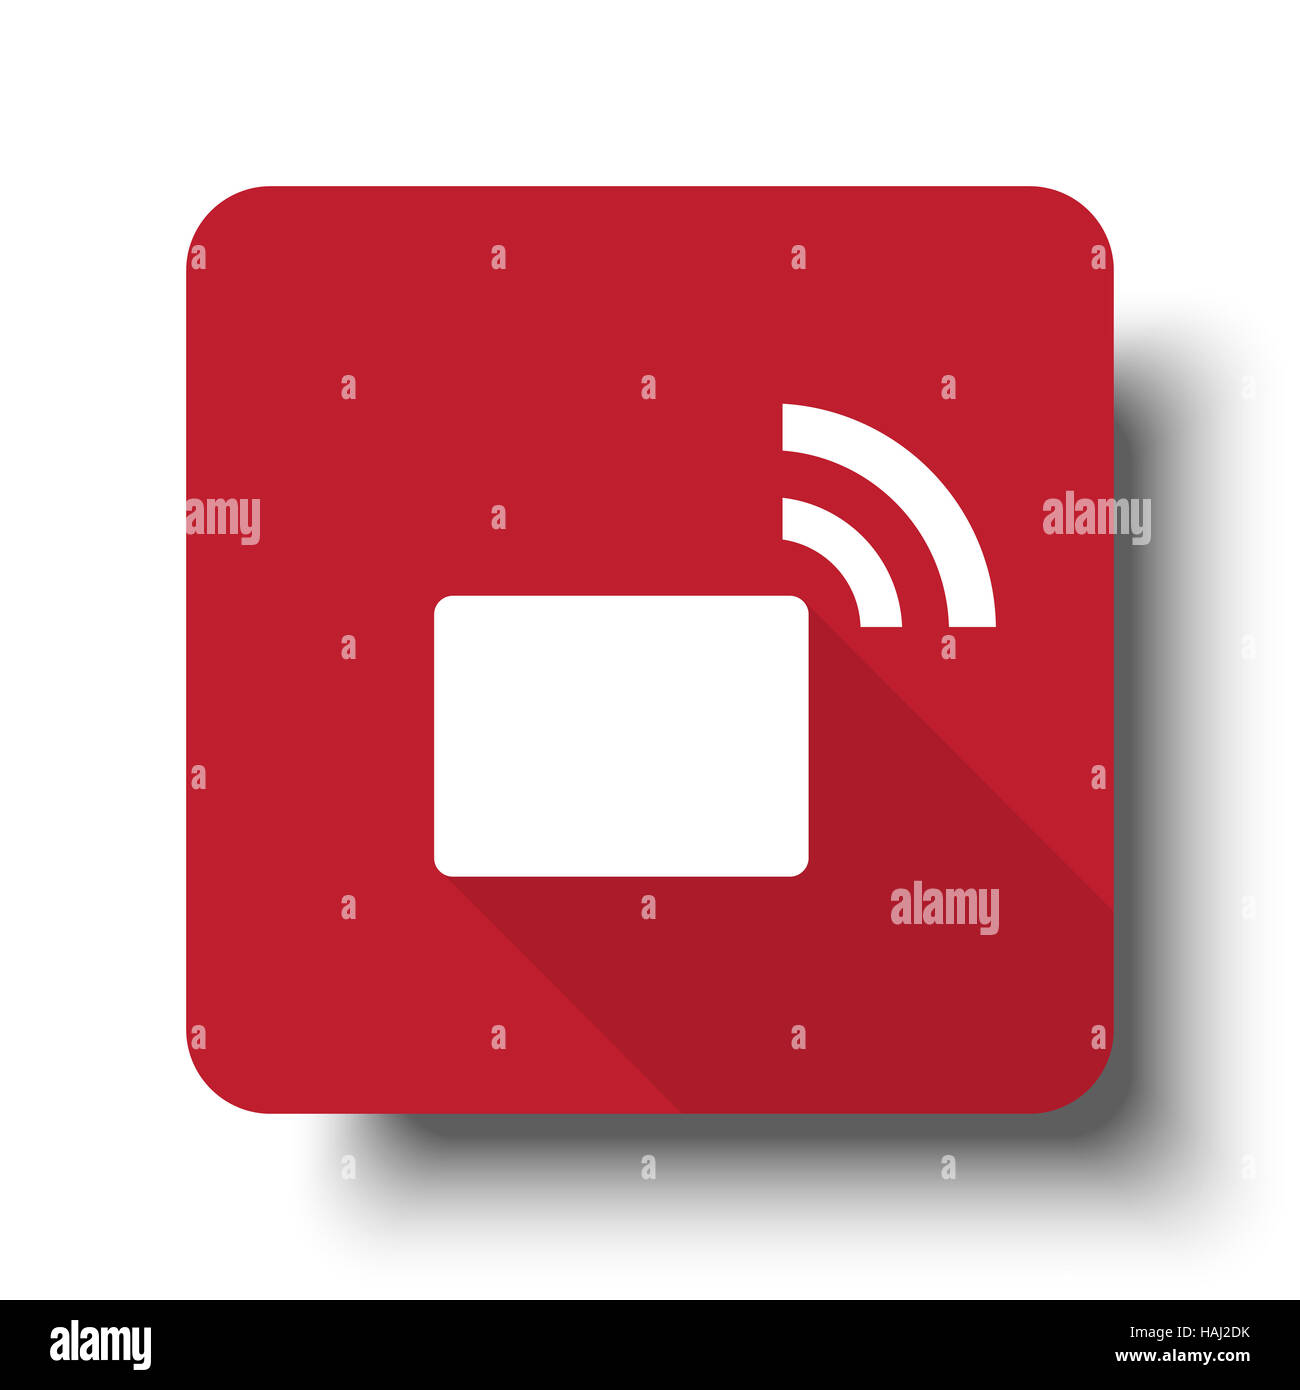 Flat Transmitter web icon on red button with drop shadow Stock Photo